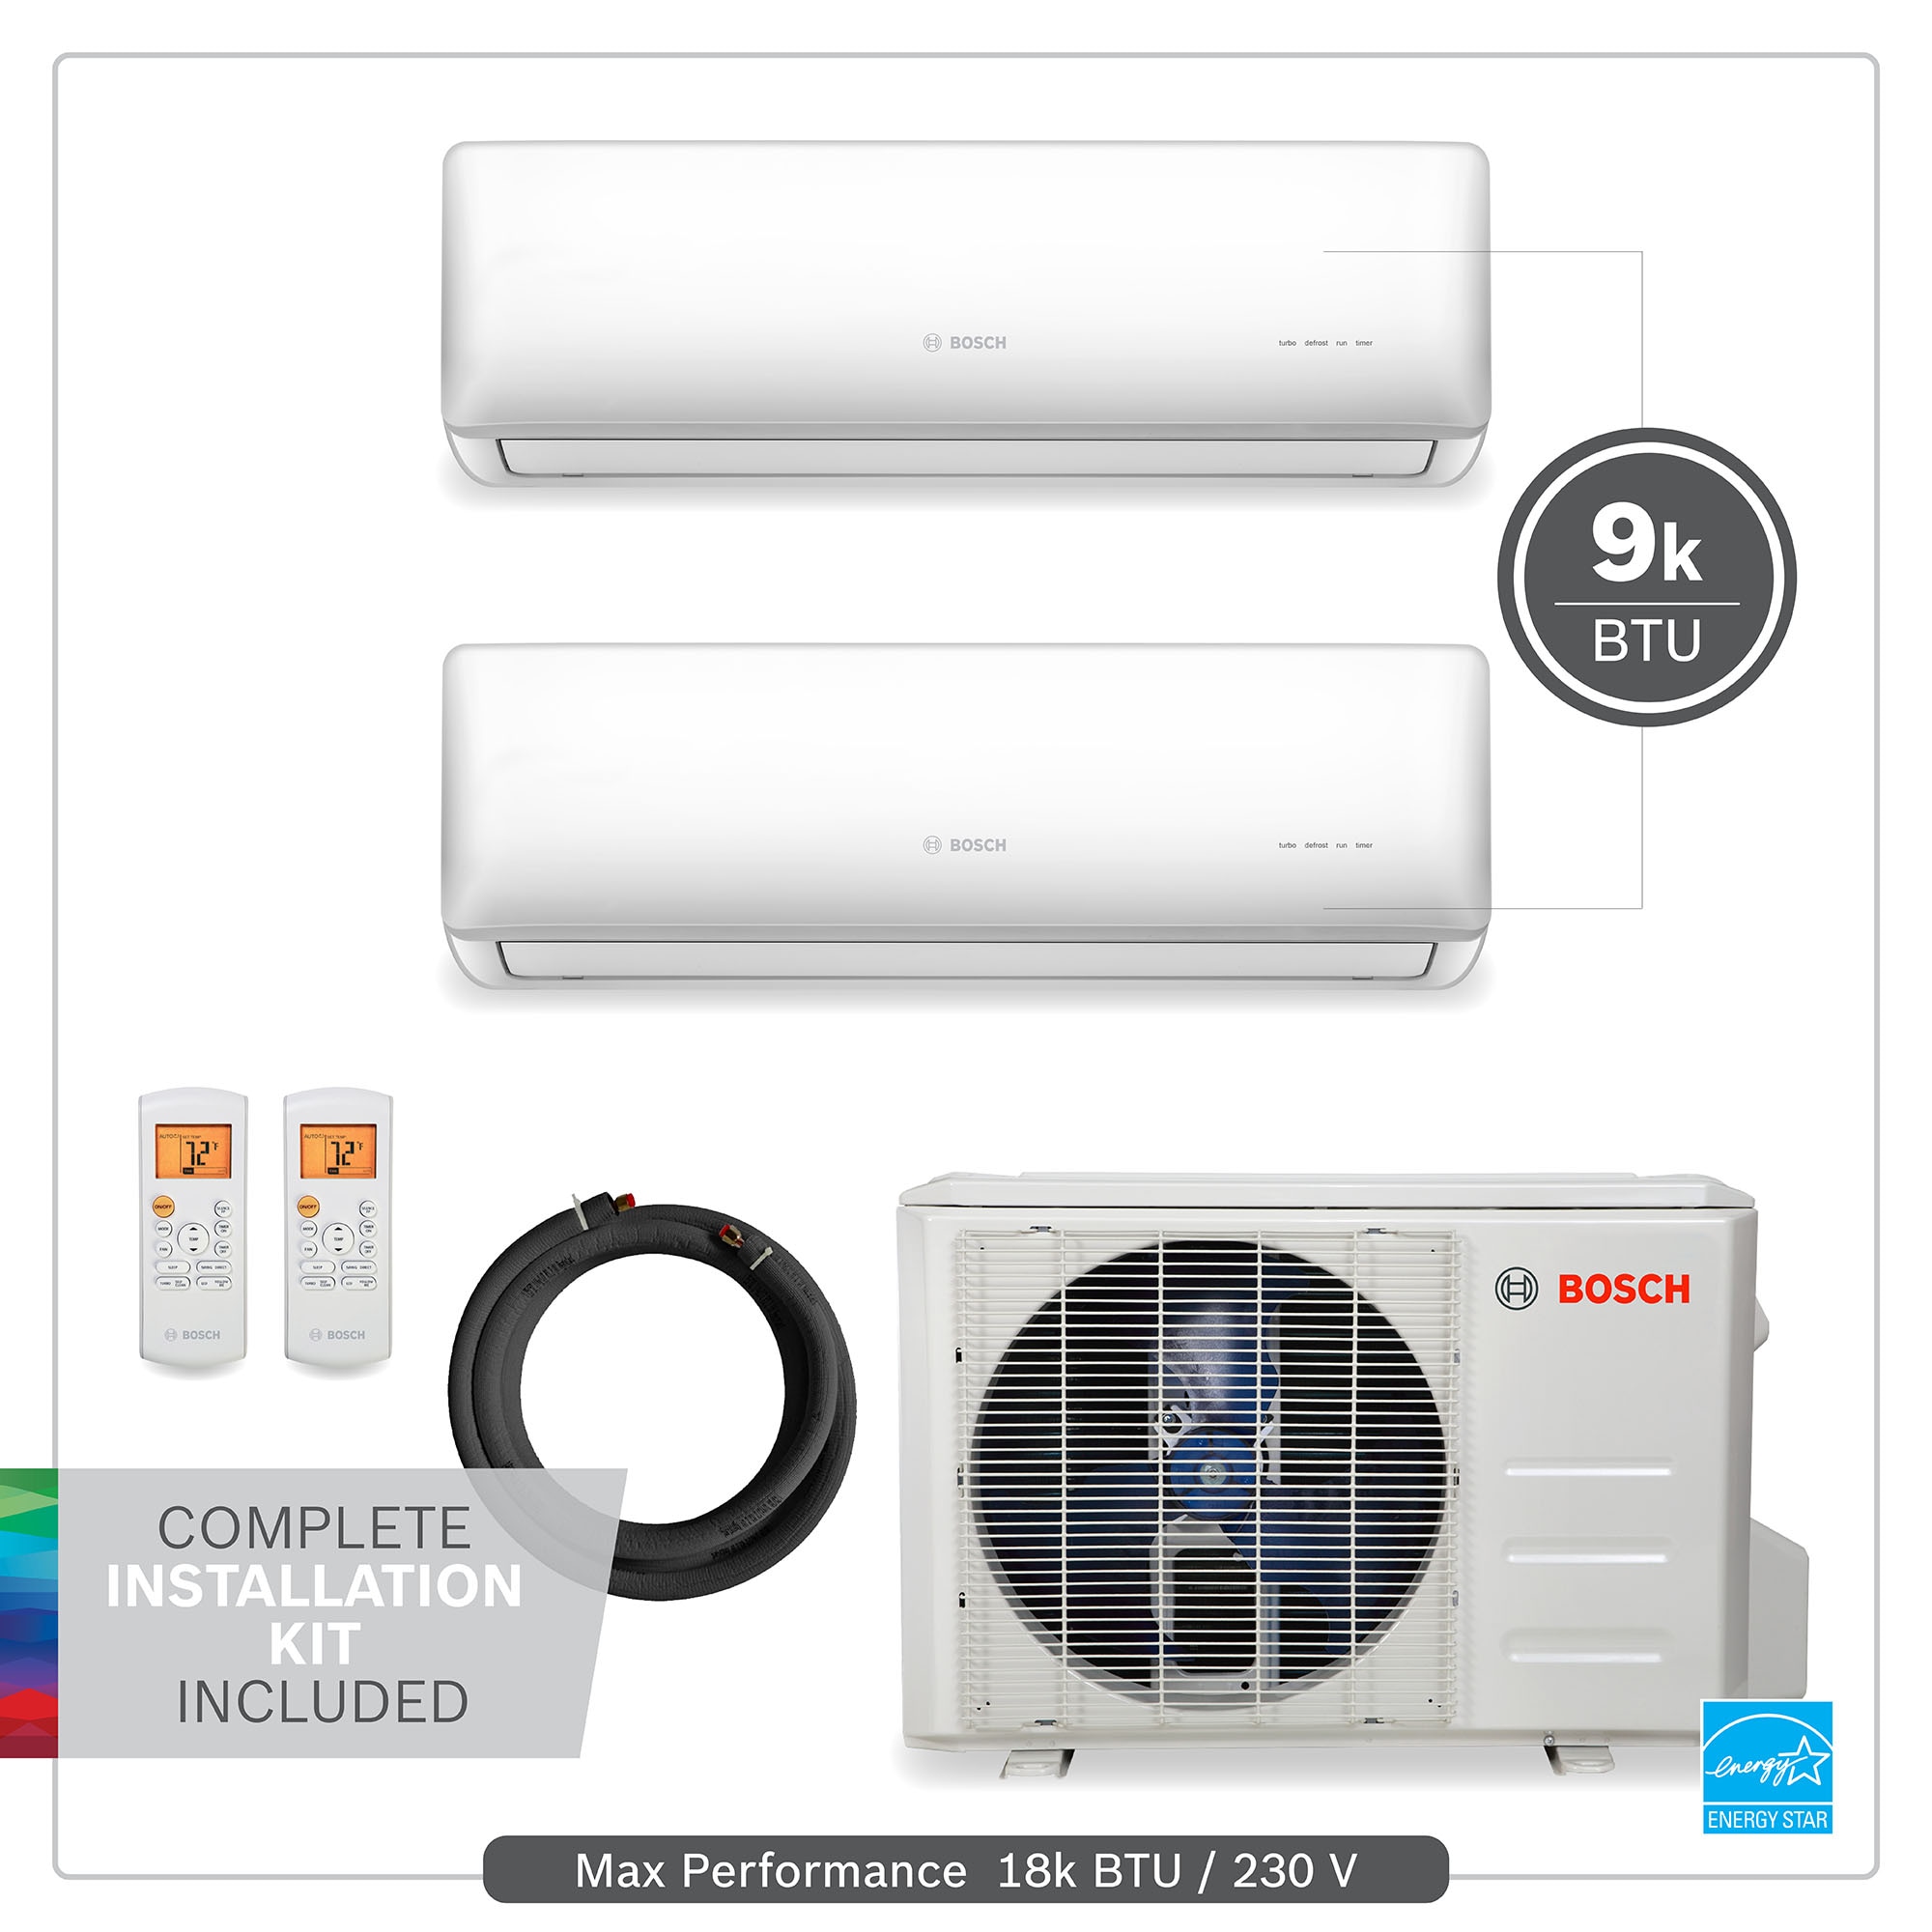 Bosch 18000-BTU 230-Volt 21.5 SEER 900-sq Ductless Mini Split Air Conditioner and Heater Installation Kit in the Ductless Splits at Lowes.com